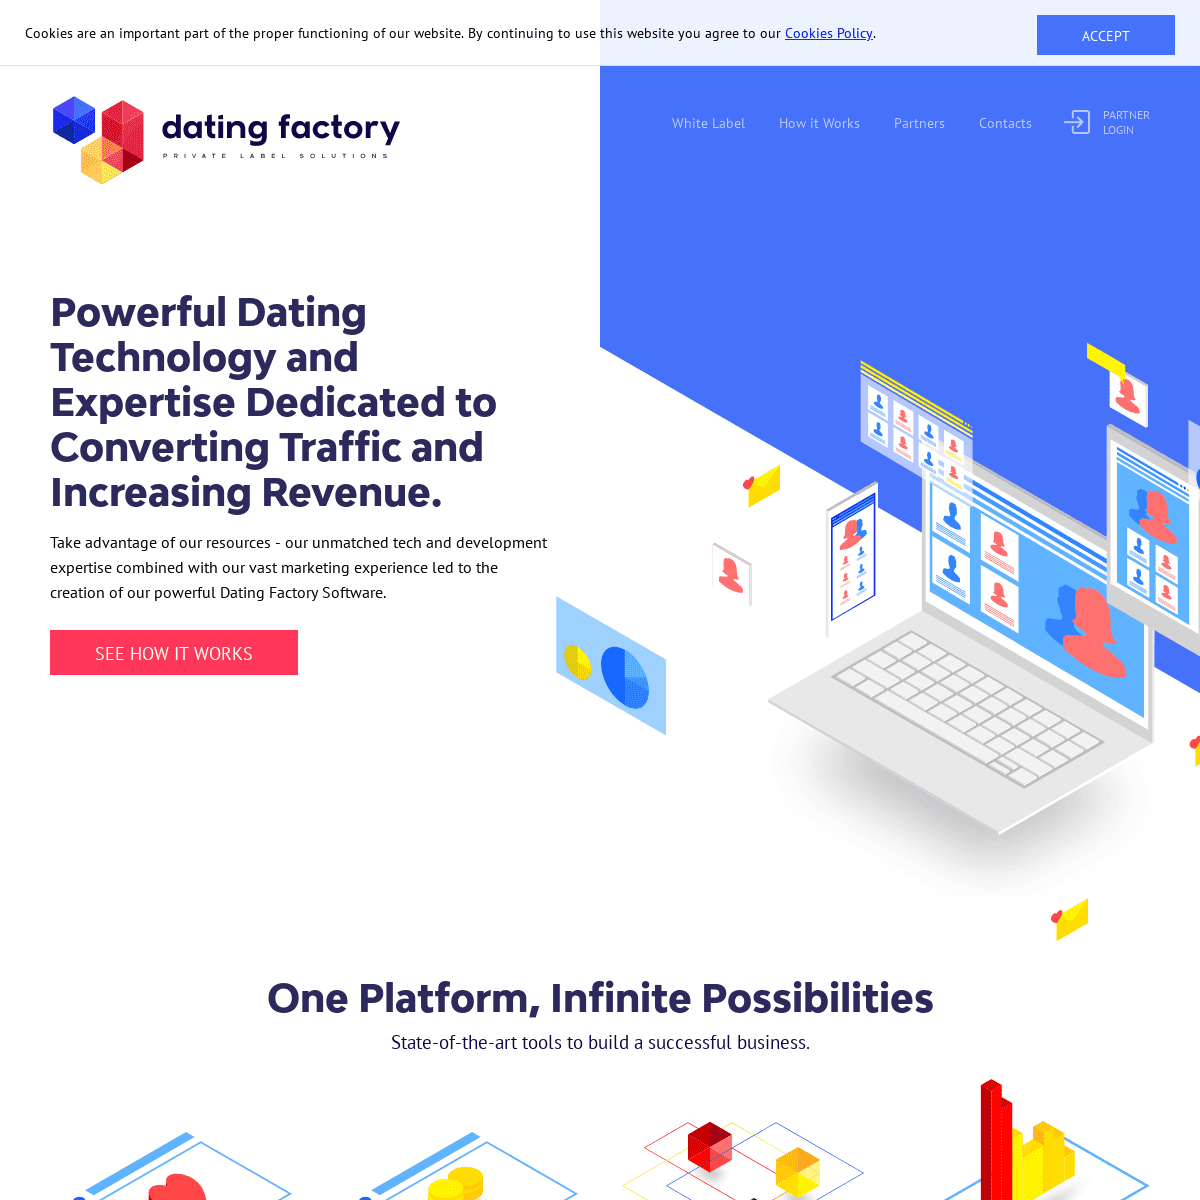 A complete backup of datingfactory.com